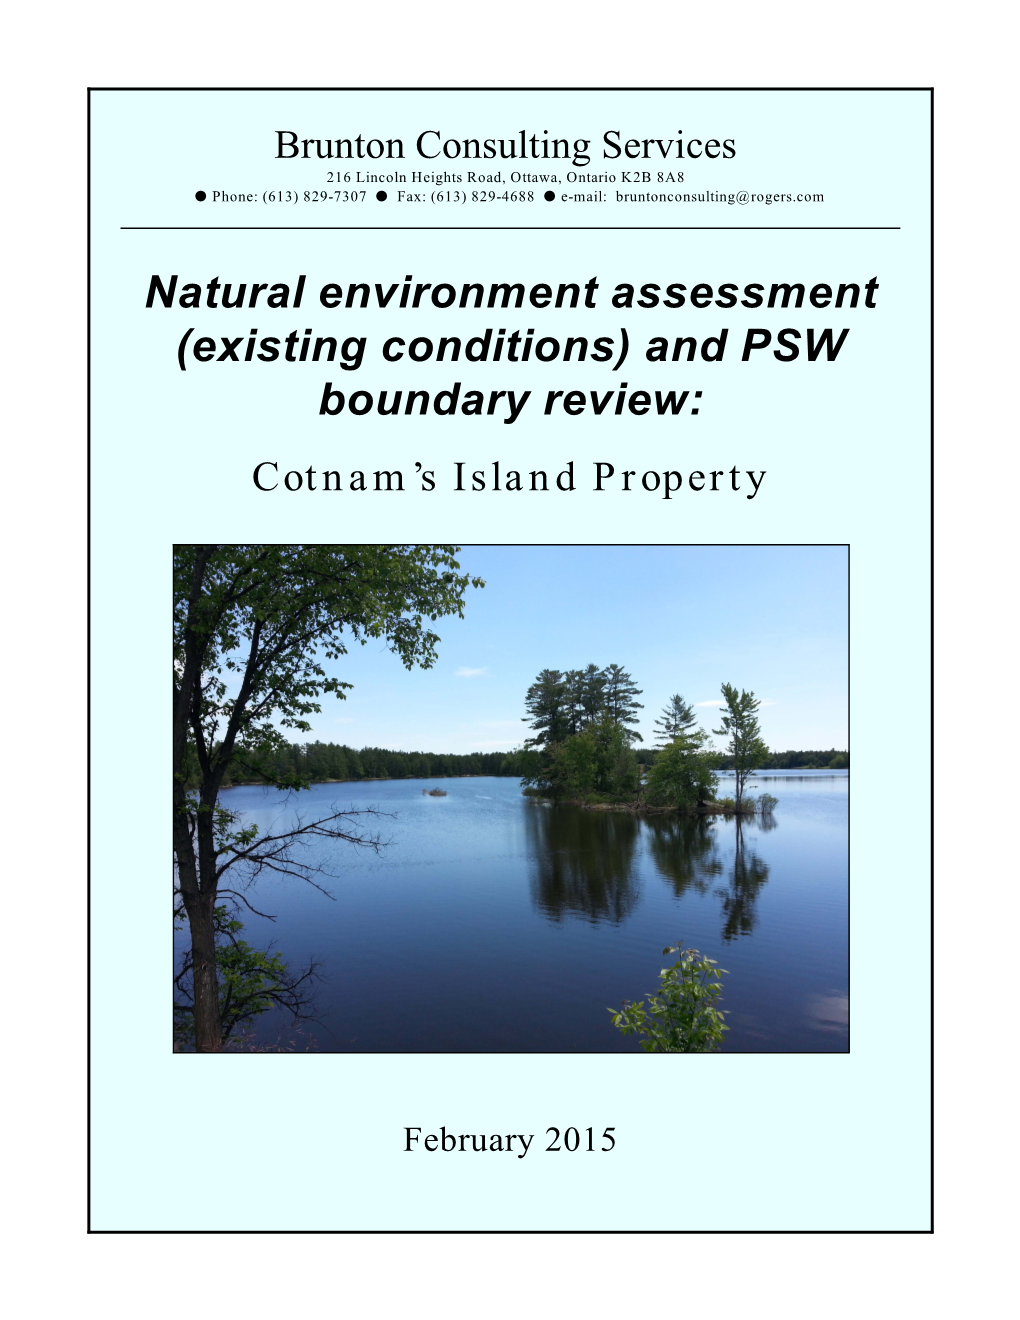 Natural Environment Assessment (Existing Conditions) and PSW Boundary Review: Cotnam’S Island Property